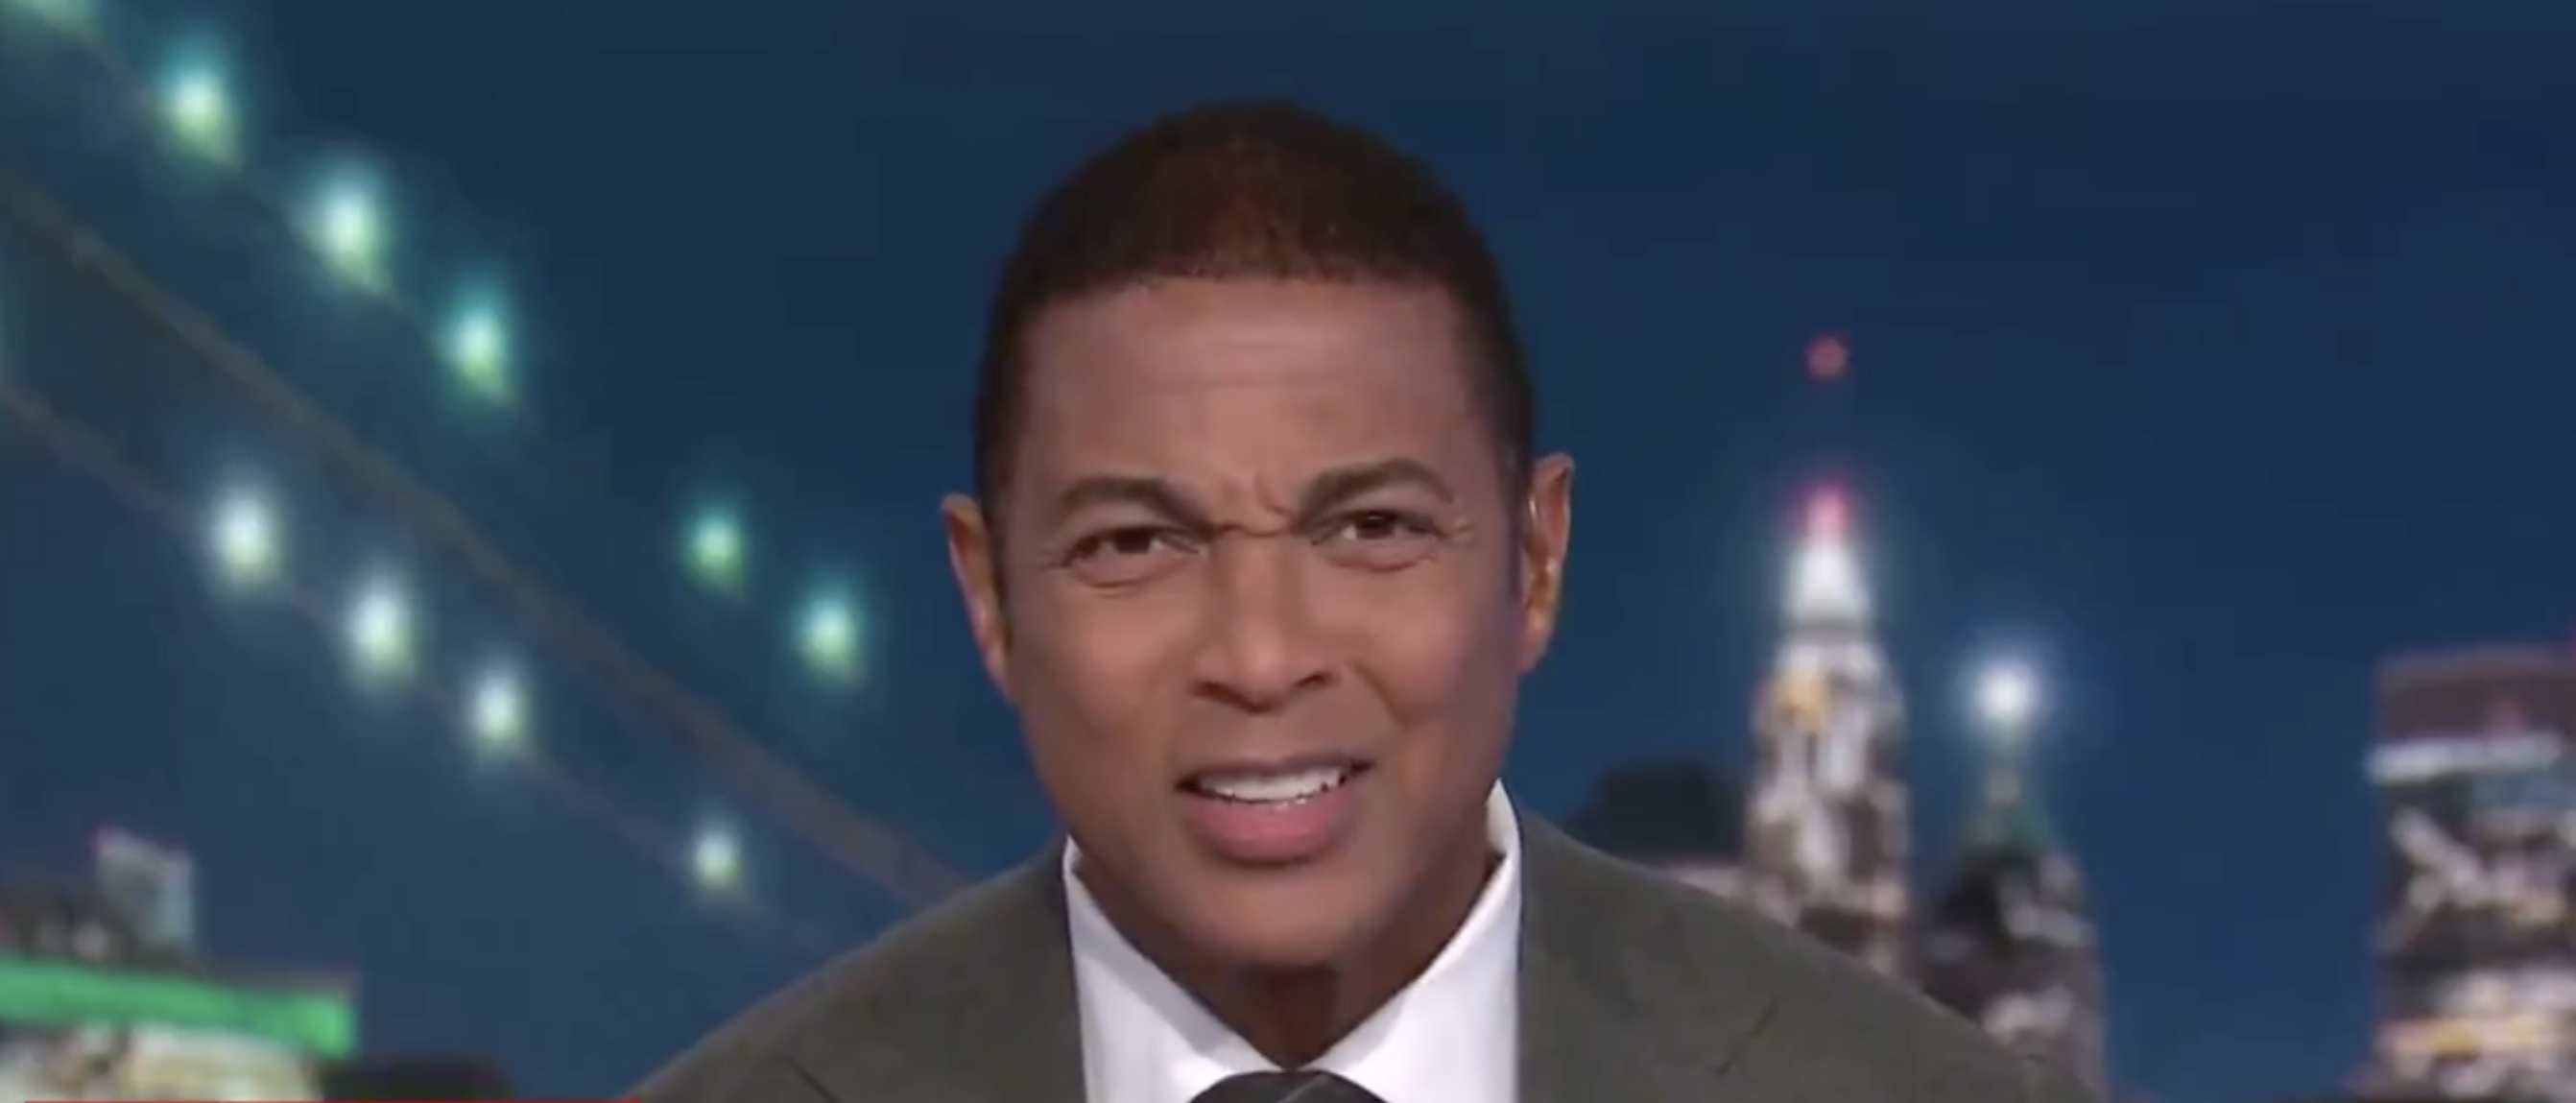 ‘Are You People Insane?’: CNN’s Don Lemon Reacts To Trump Team’s Meme | The ...